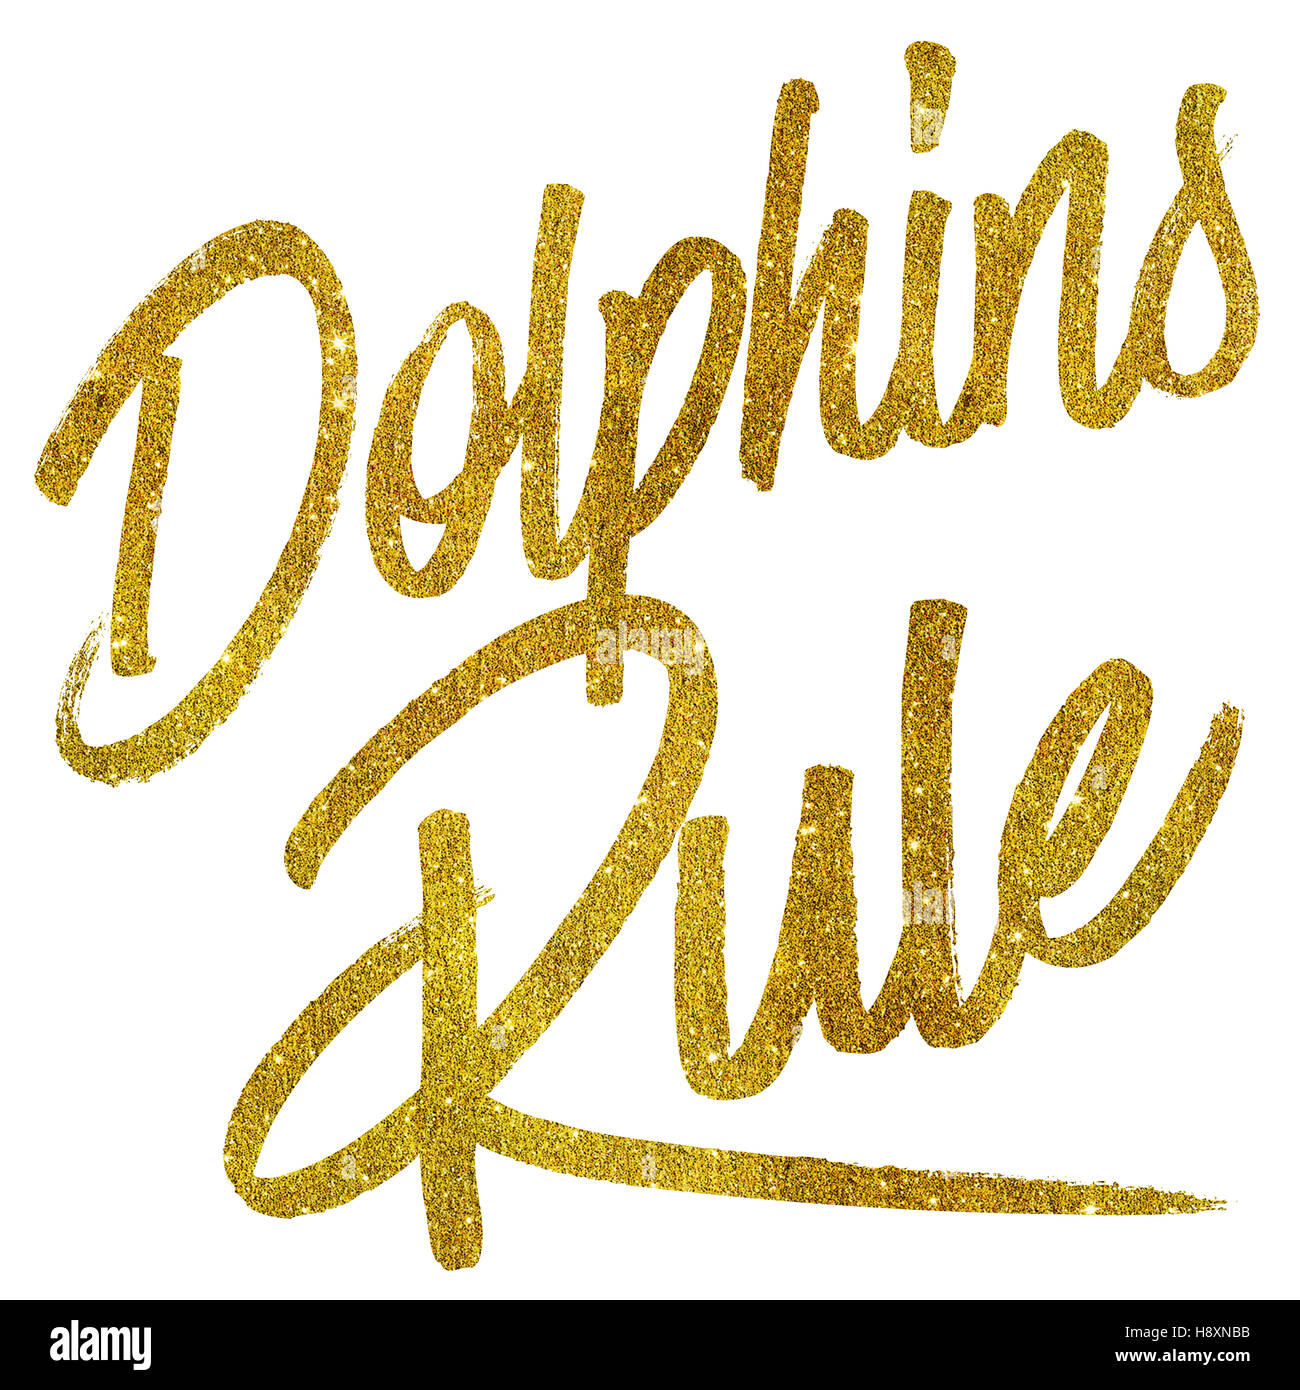 Dolphins Rule Gold Faux Foil Metallic Glitter Quote Isolated Stock Photo